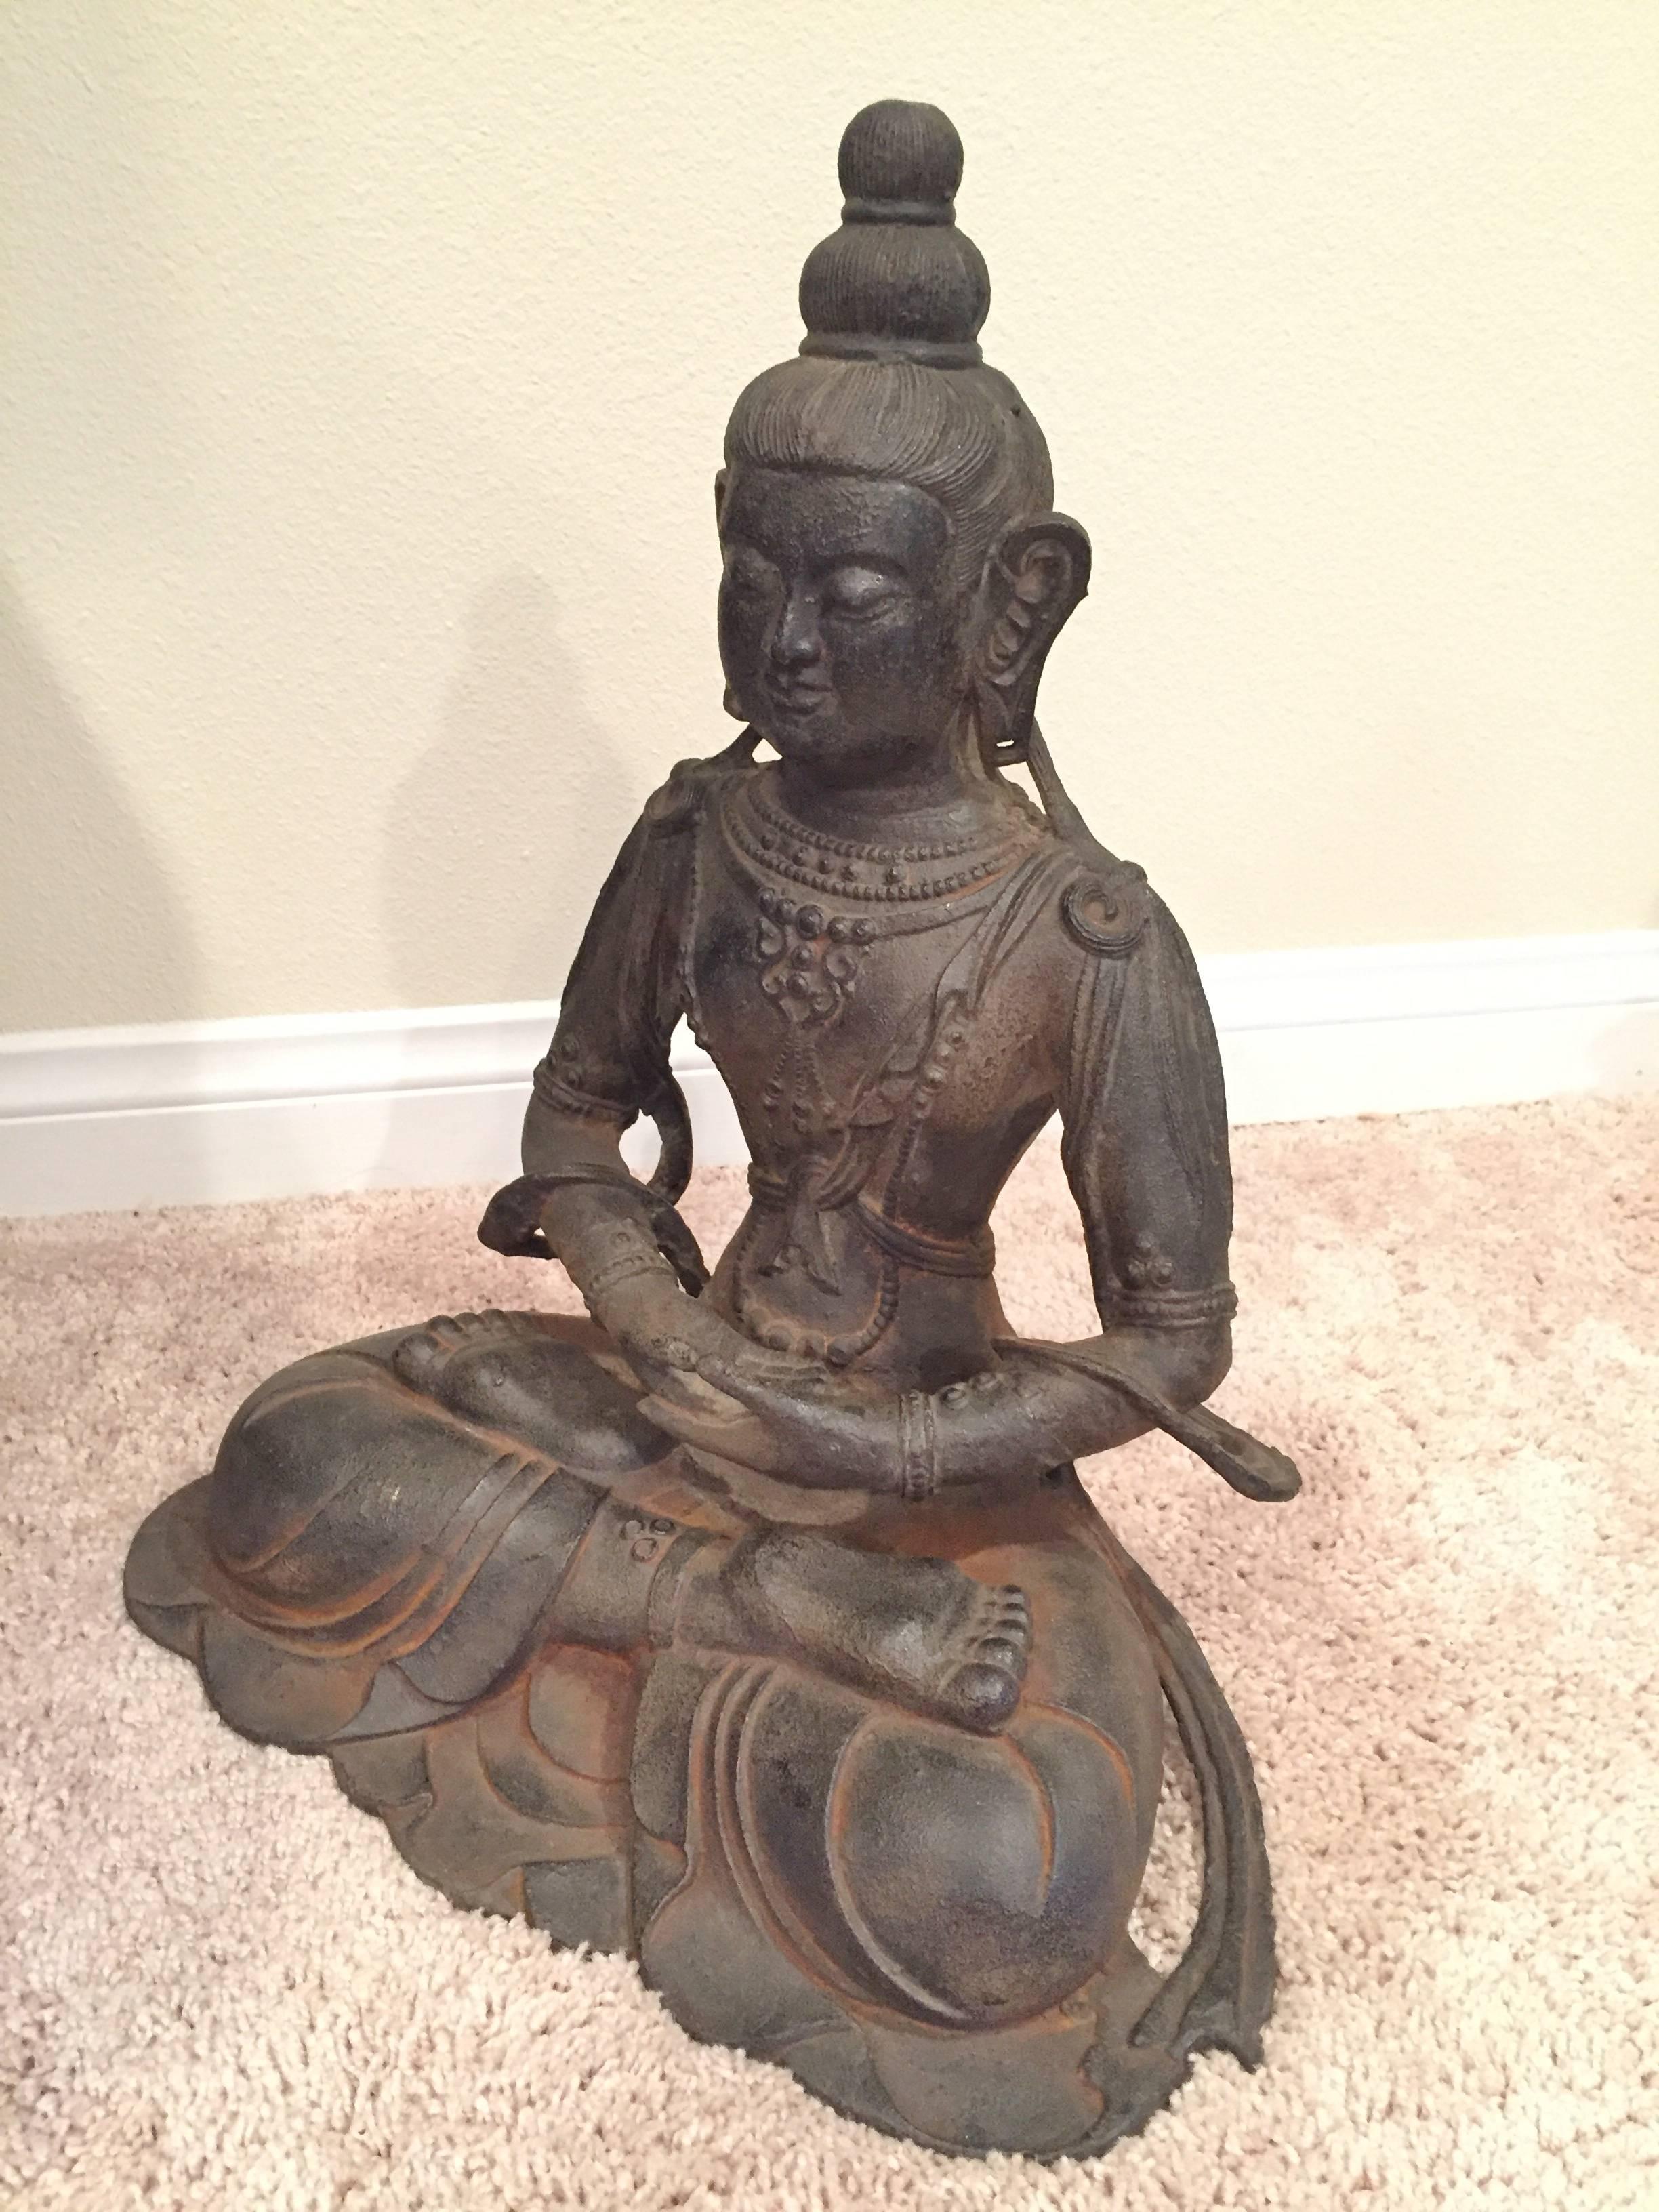 A very large iron Buddha statue. 

This is a very fine piece that is incredibly detailed. Buddha has beautiful facial features, fingers and toes. The robe shows fluid folds and sashes. A decorated bodice features necklaces and flowers. 

This piece